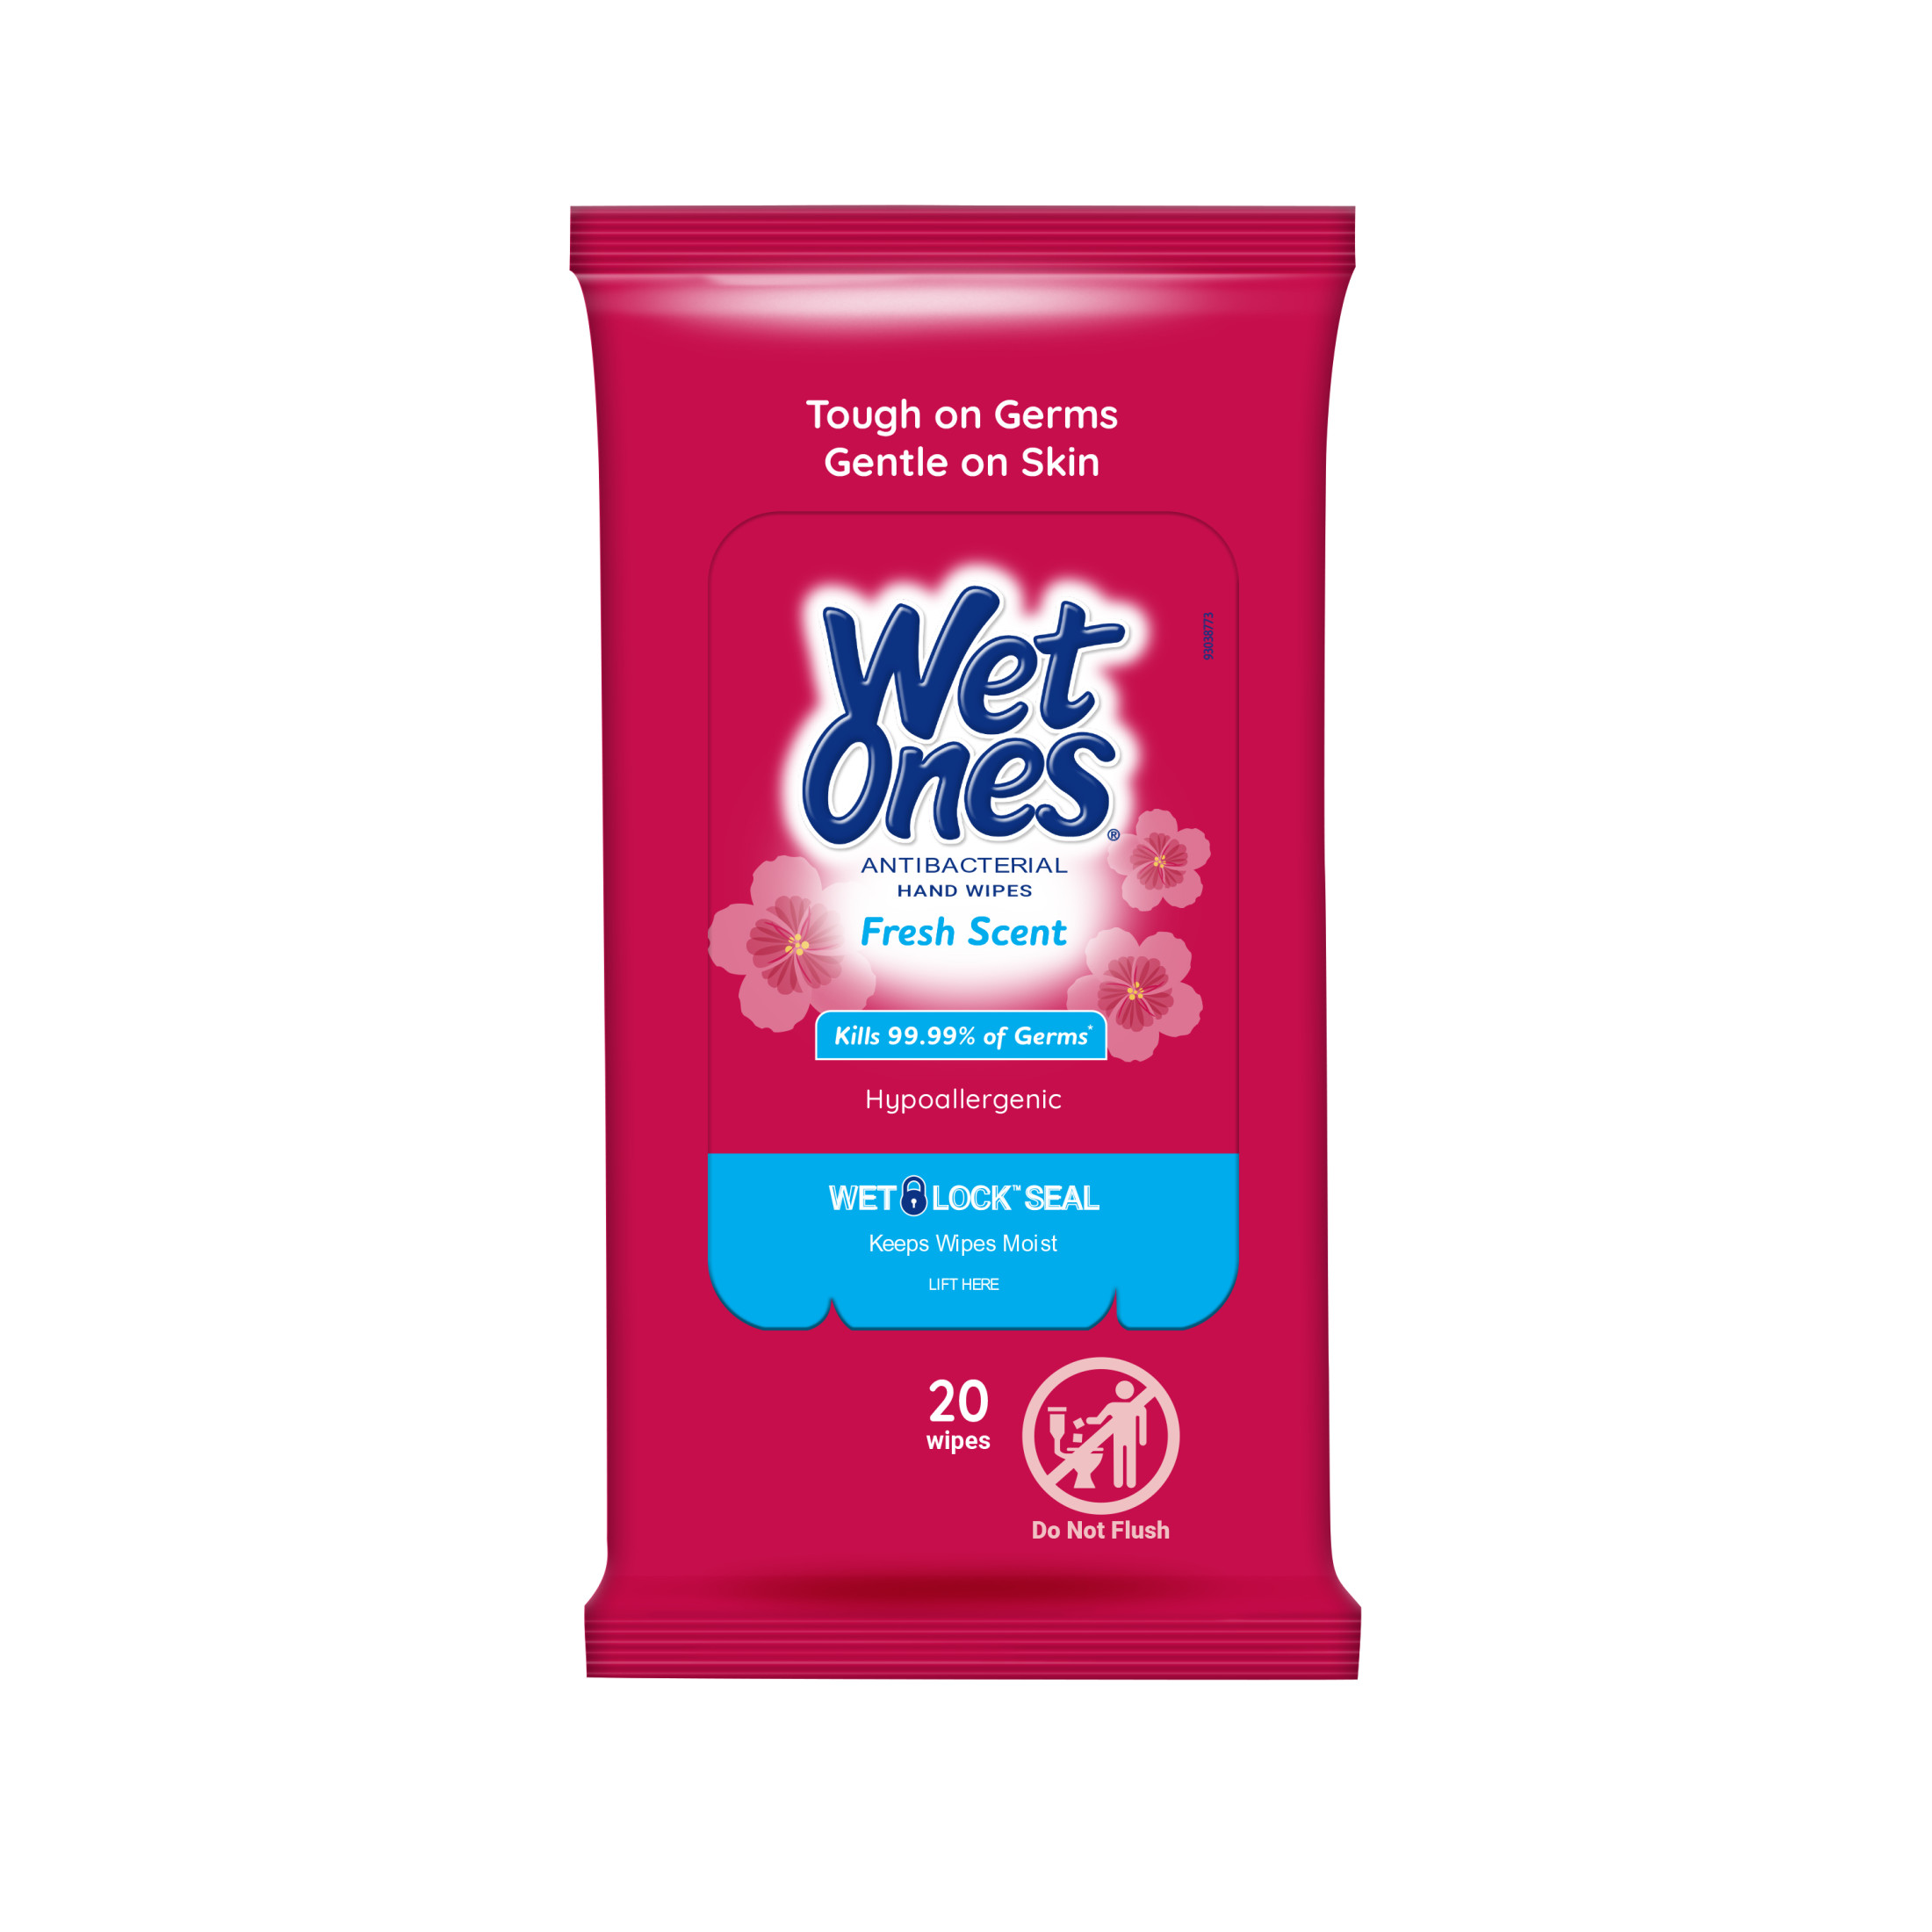 Wet Ones Antibacterial Fresh Scent Hand Wipes 20 Ct Travel Pack, Hypoallergenic, Kills Germs, Leaves Hands Feeling Clean - image 3 of 10